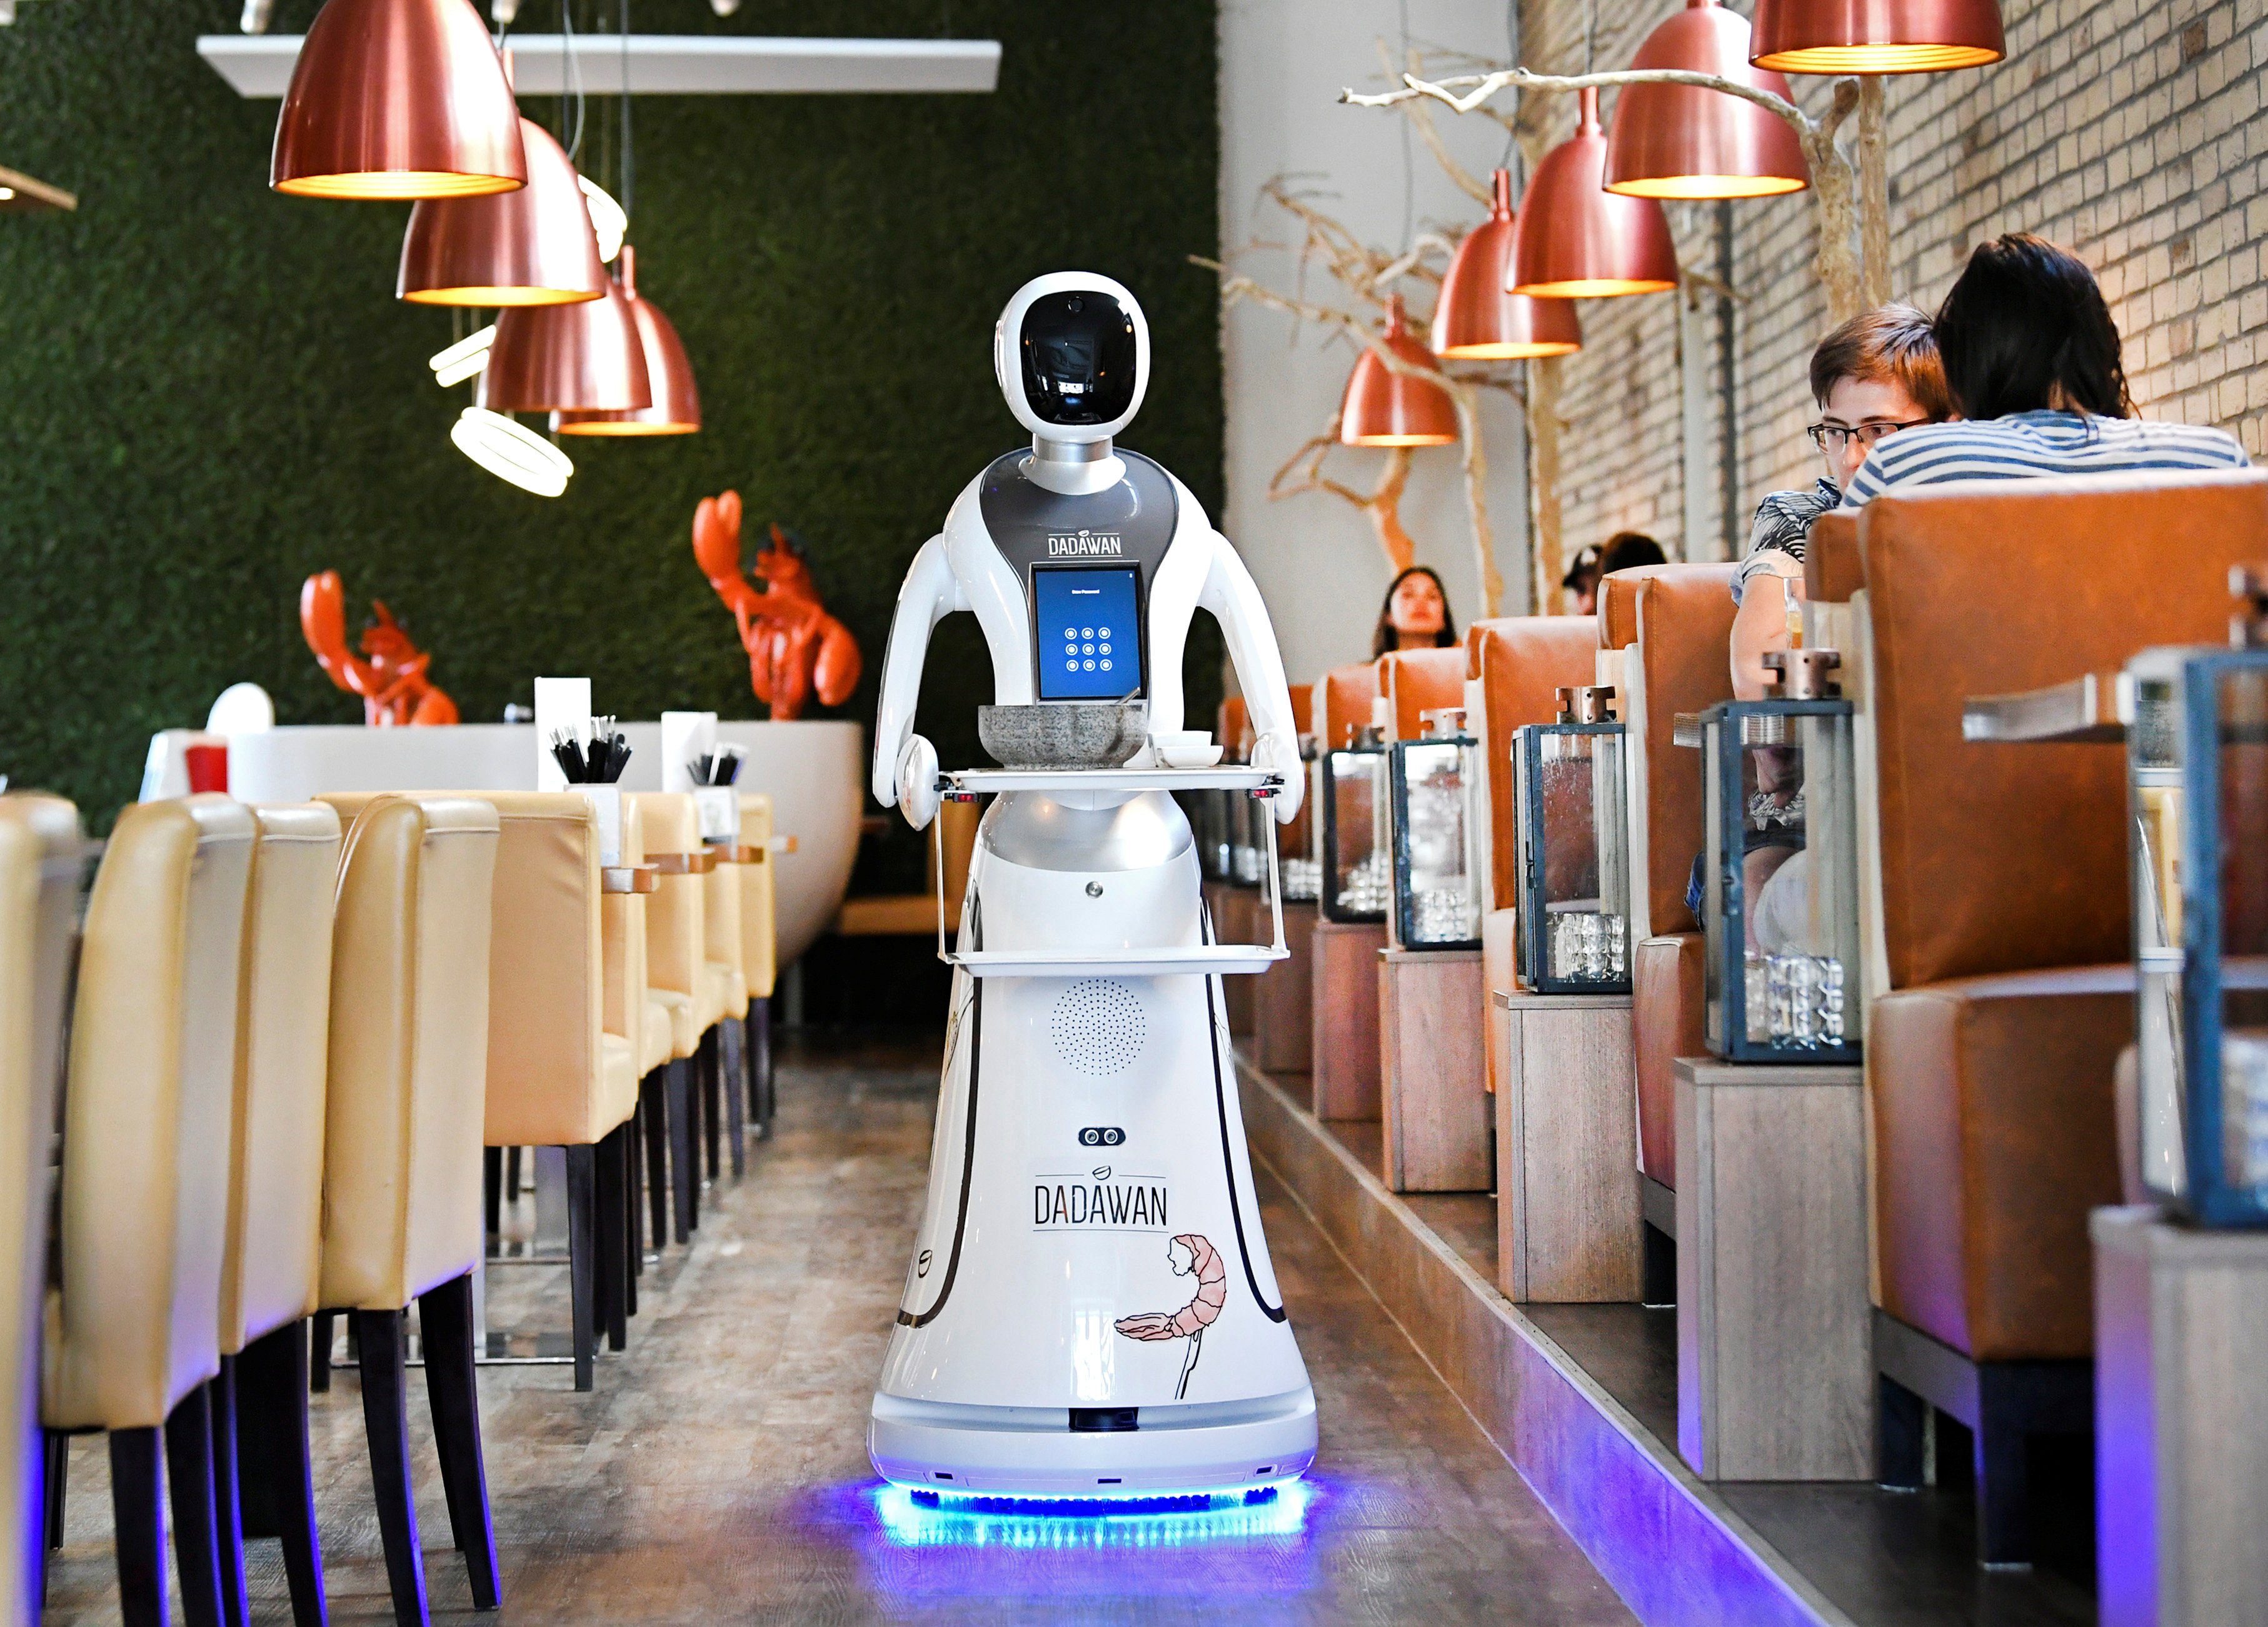 A robot waiter in a Chinese restaurant. South Korea has embraced robot waiters as a response to labour shortages caused in part by a demographic crisis. Photo: Reuters